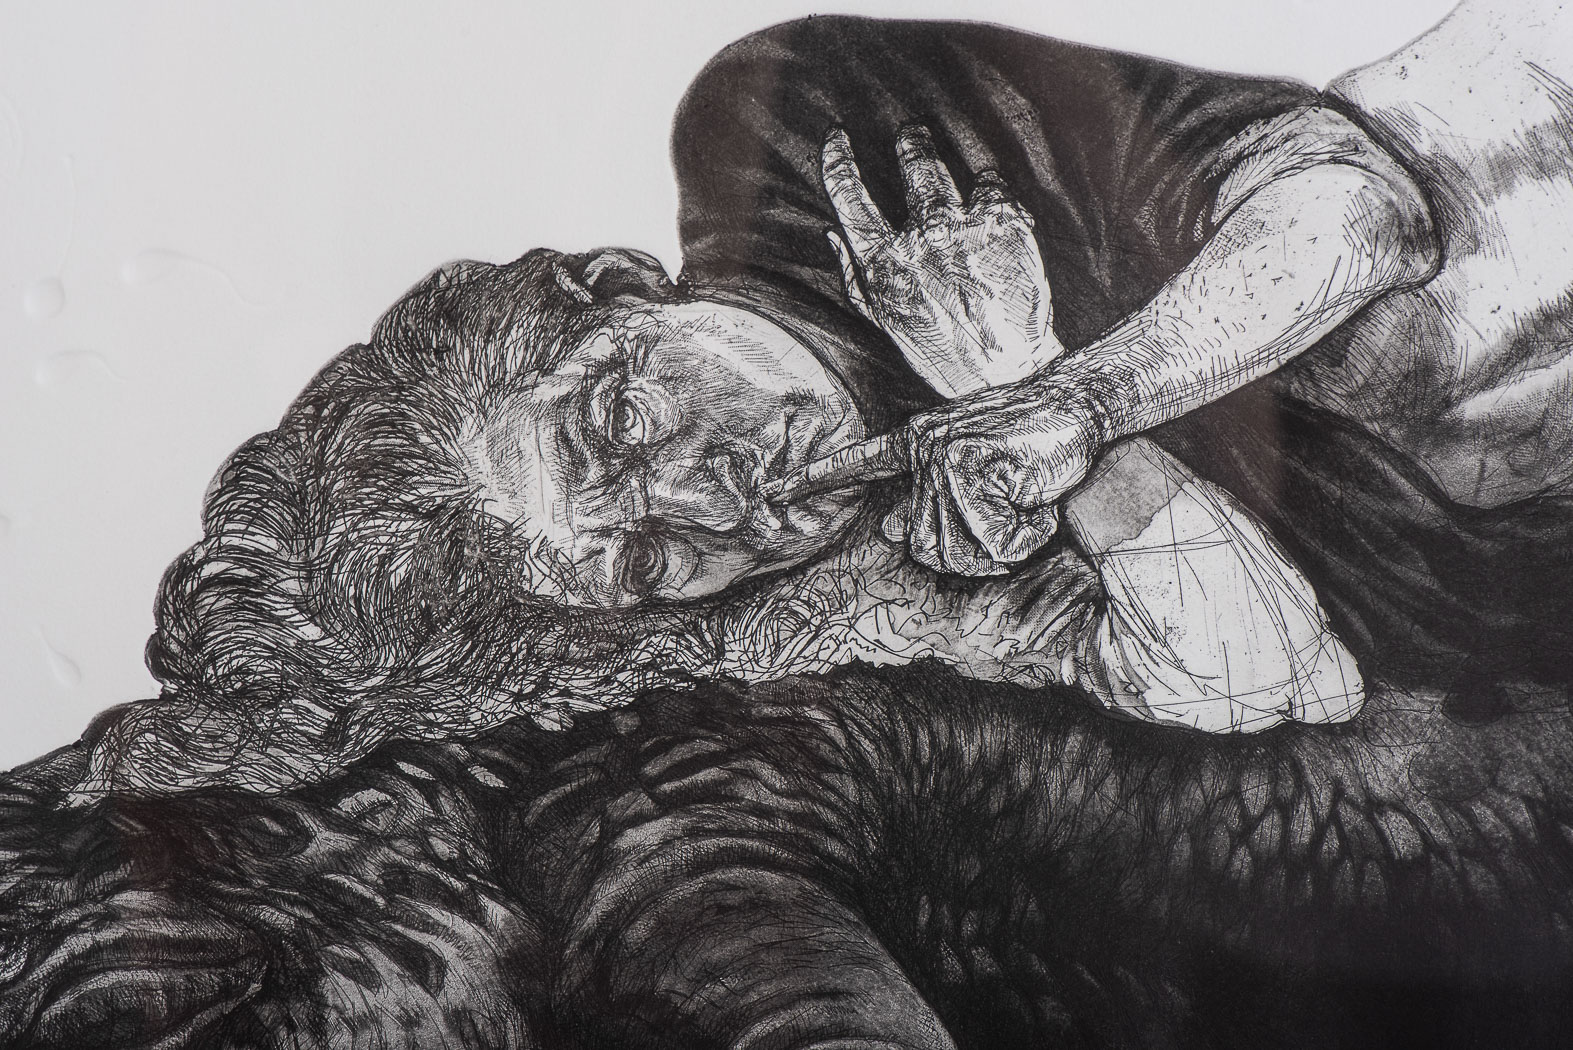 Diane Veronique Victor (South African 1964-) LET SLEEPING CROCS LIE drypoint, etching and embossing, - Image 3 of 4